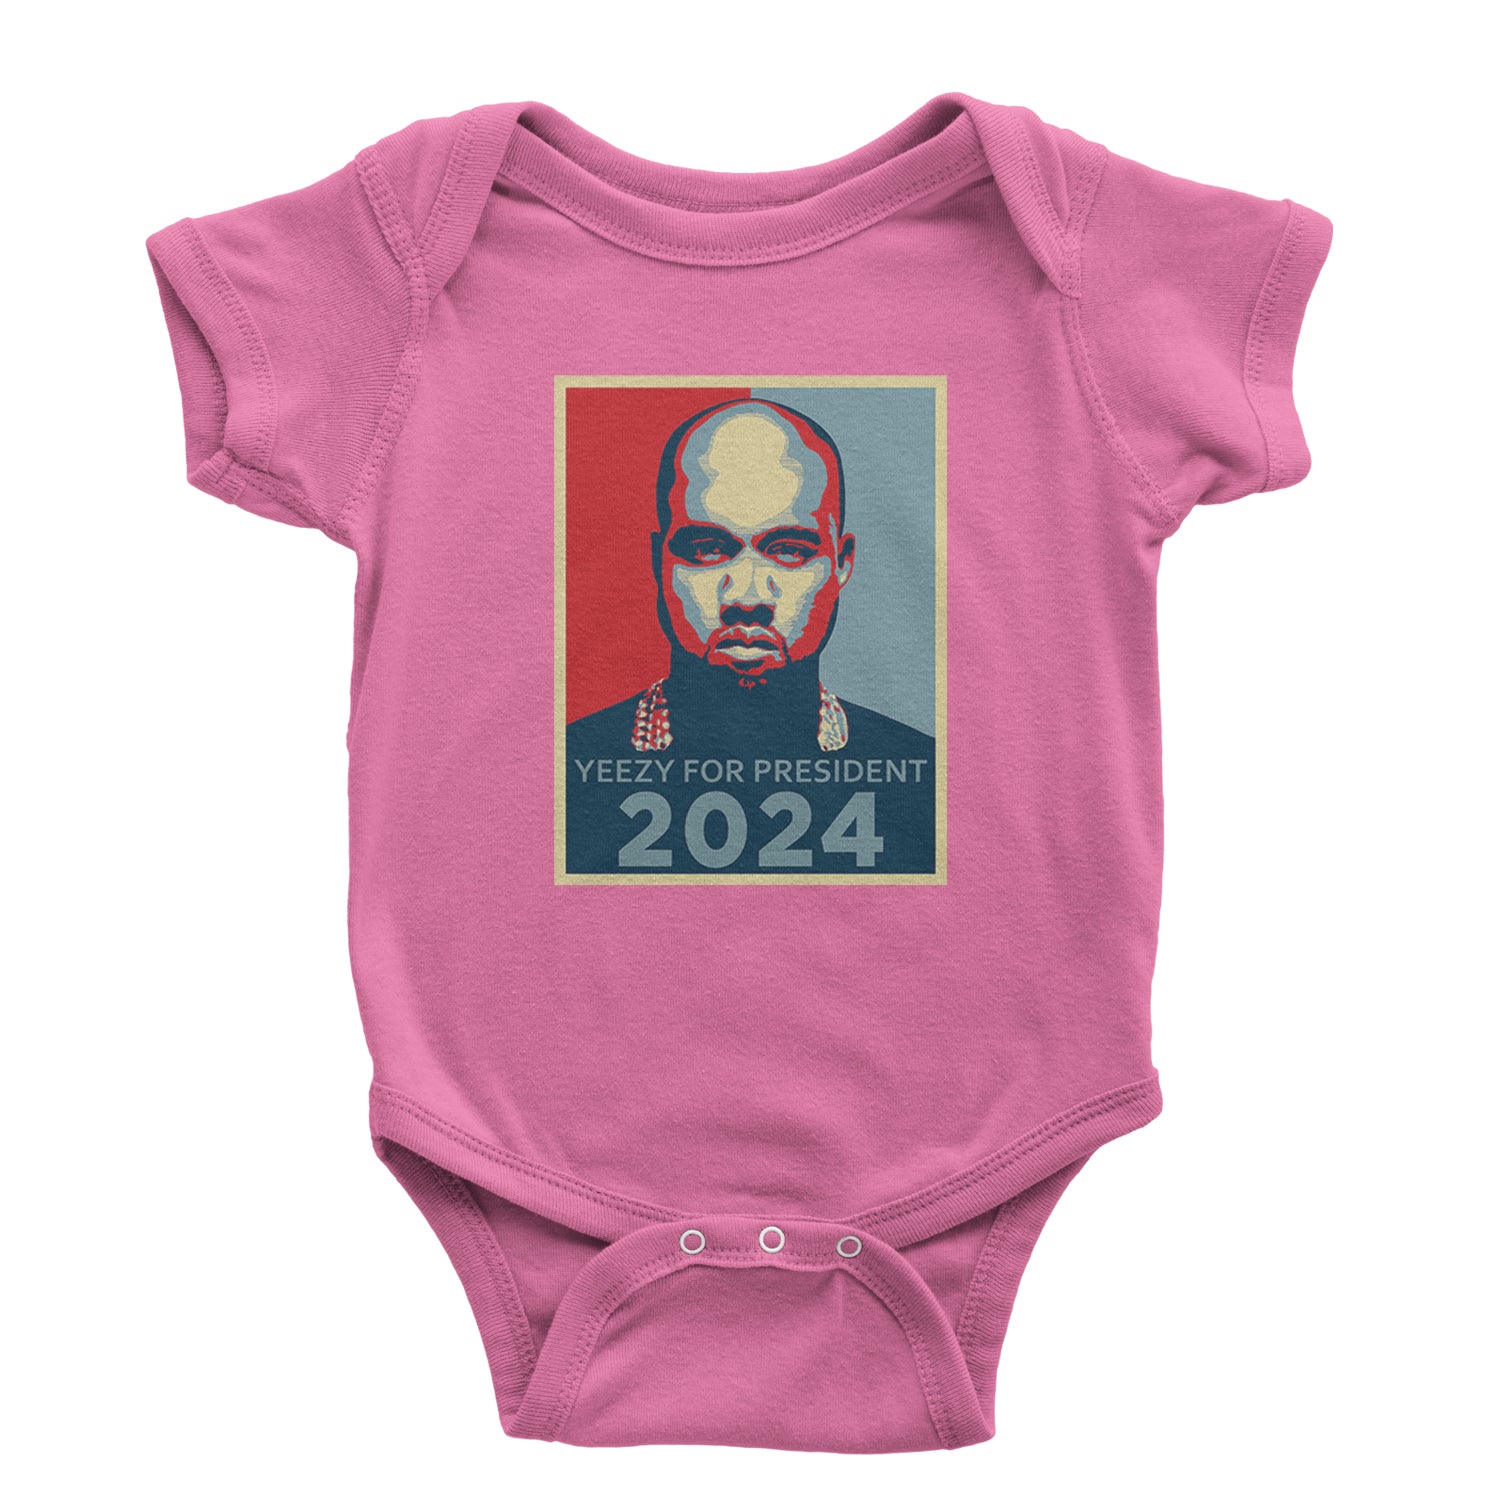 Yeezus For President Vote for Ye Infant One-Piece Romper Bodysuit and Toddler T-shirt Raspberry